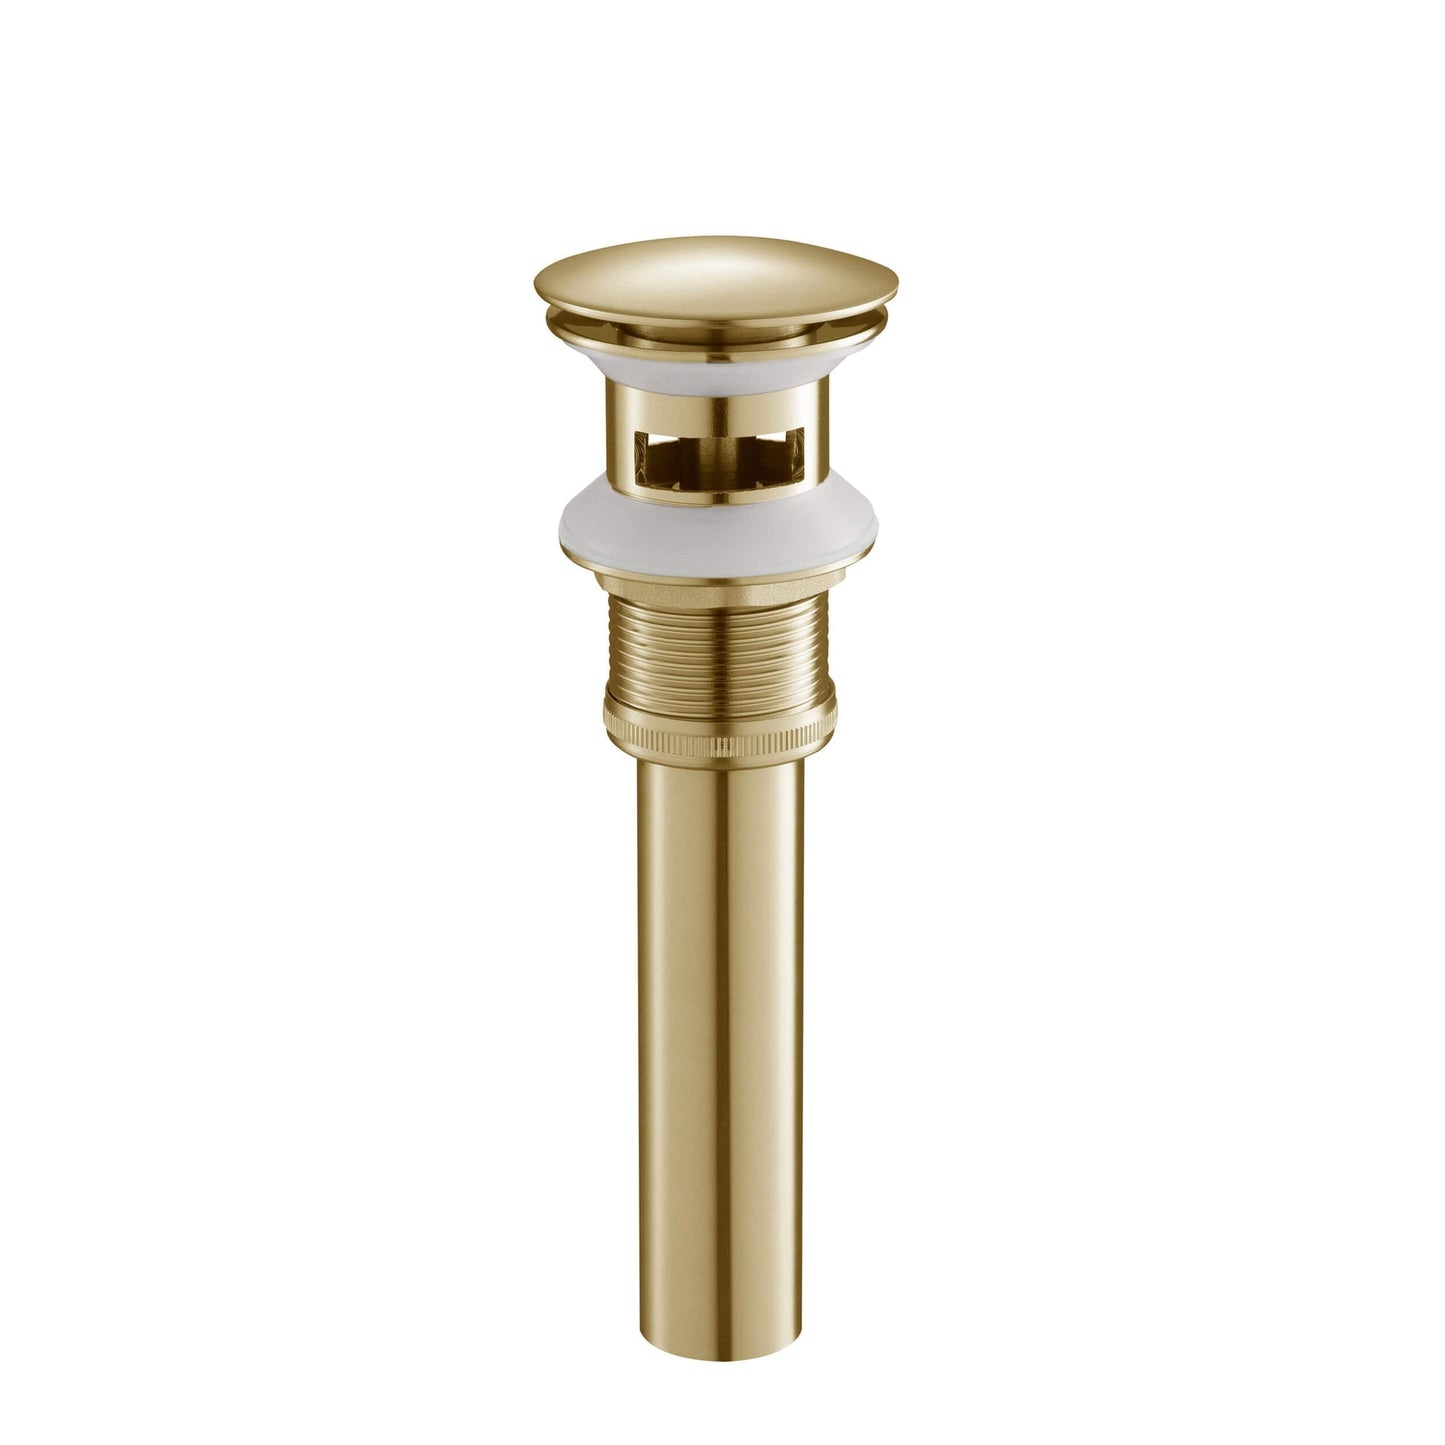 Kibi Brass Bathroom Sink Pop Up Drain Stopper Full Cover With Overflow in Brushed Gold Finish